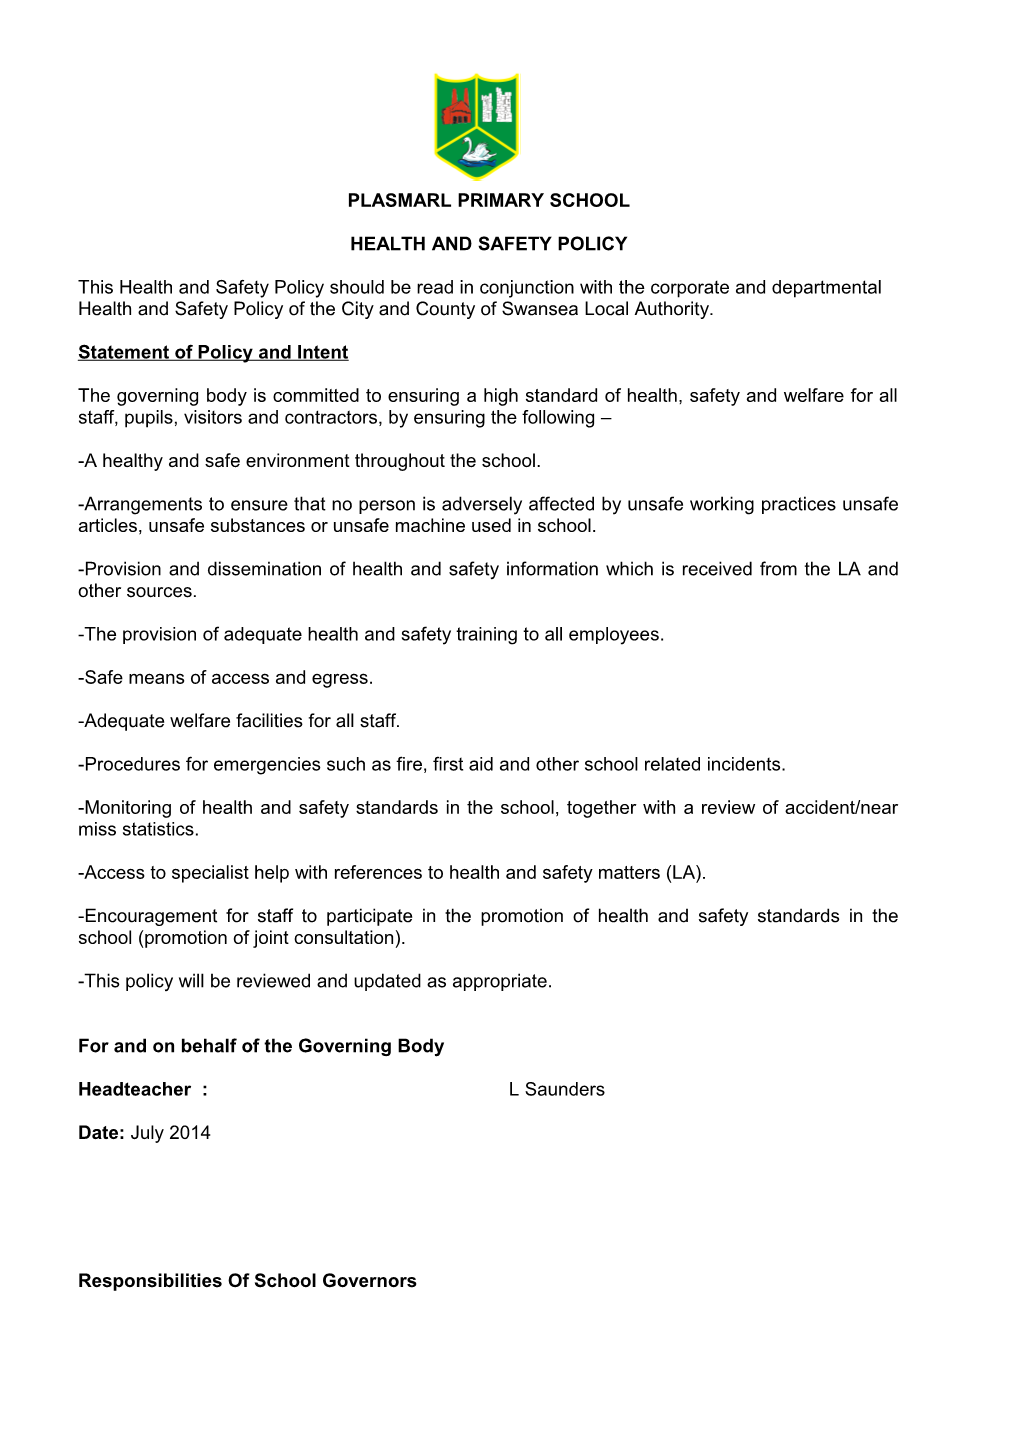 Health and Safety Policy 2015